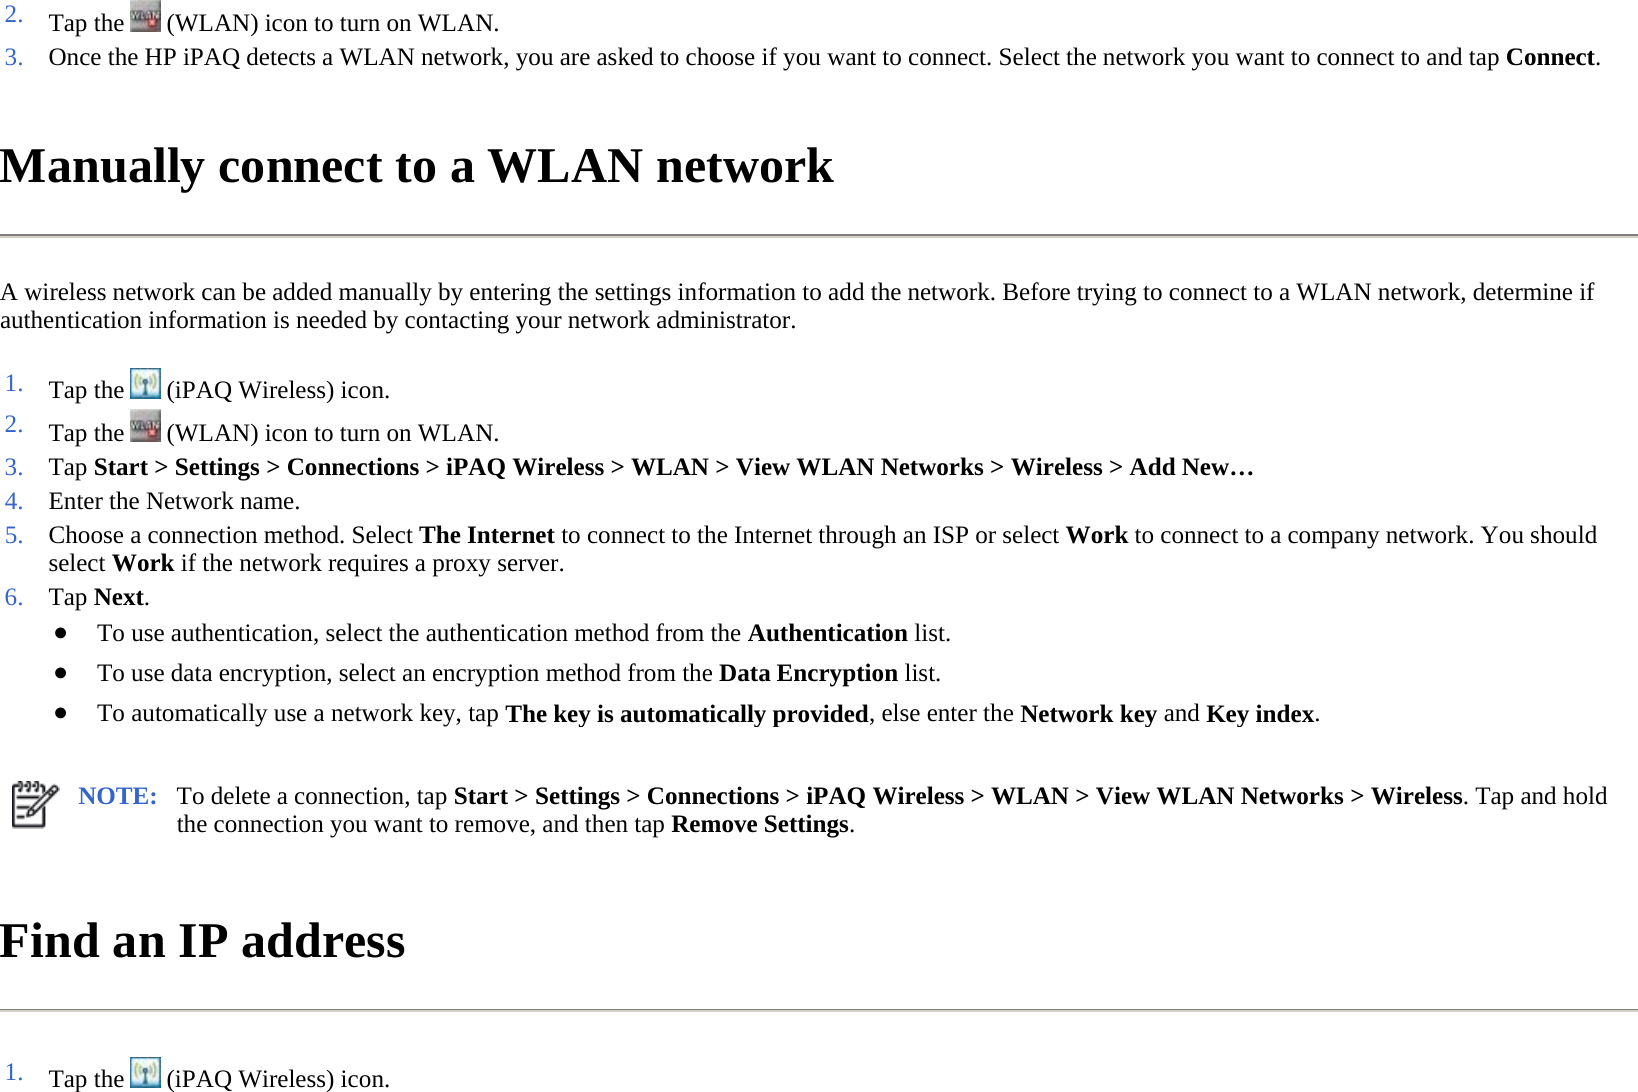 Manually connect to a WLAN network  A wireless network can be added manually by entering the settings information to add the network. Before trying to connect to a WLAN network, determine if authentication information is needed by contacting your network administrator.  Find an IP address  2. Tap the   (WLAN) icon to turn on WLAN.3. Once the HP iPAQ detects a WLAN network, you are asked to choose if you want to connect. Select the network you want to connect to and tap Connect.1. Tap the   (iPAQ Wireless) icon. 2. Tap the   (WLAN) icon to turn on WLAN.3. Tap Start &gt; Settings &gt; Connections &gt; iPAQ Wireless &gt;WLAN &gt;View WLAN Networks &gt;Wireless &gt;Add New…4. Enter the Network name.5. Choose a connection method. Select The Internet to connect to the Internet through an ISP or select Work to connect to a company network. You should select Work if the network requires a proxy server.6. Tap Next. ●To use authentication, select the authentication method from the Authentication list. ●To use data encryption, select an encryption method from the Data Encryption list. ●To automatically use a network key, tapThe key is automatically provided, else enter the Network keyand Key index.NOTE: To delete a connection, tap Start &gt; Settings &gt; Connections &gt; iPAQ Wireless &gt; WLAN &gt; View WLAN Networks &gt; Wireless. Tap and hold the connection you want to remove, and then tap Remove Settings.  1. Tap the   (iPAQ Wireless) icon. 